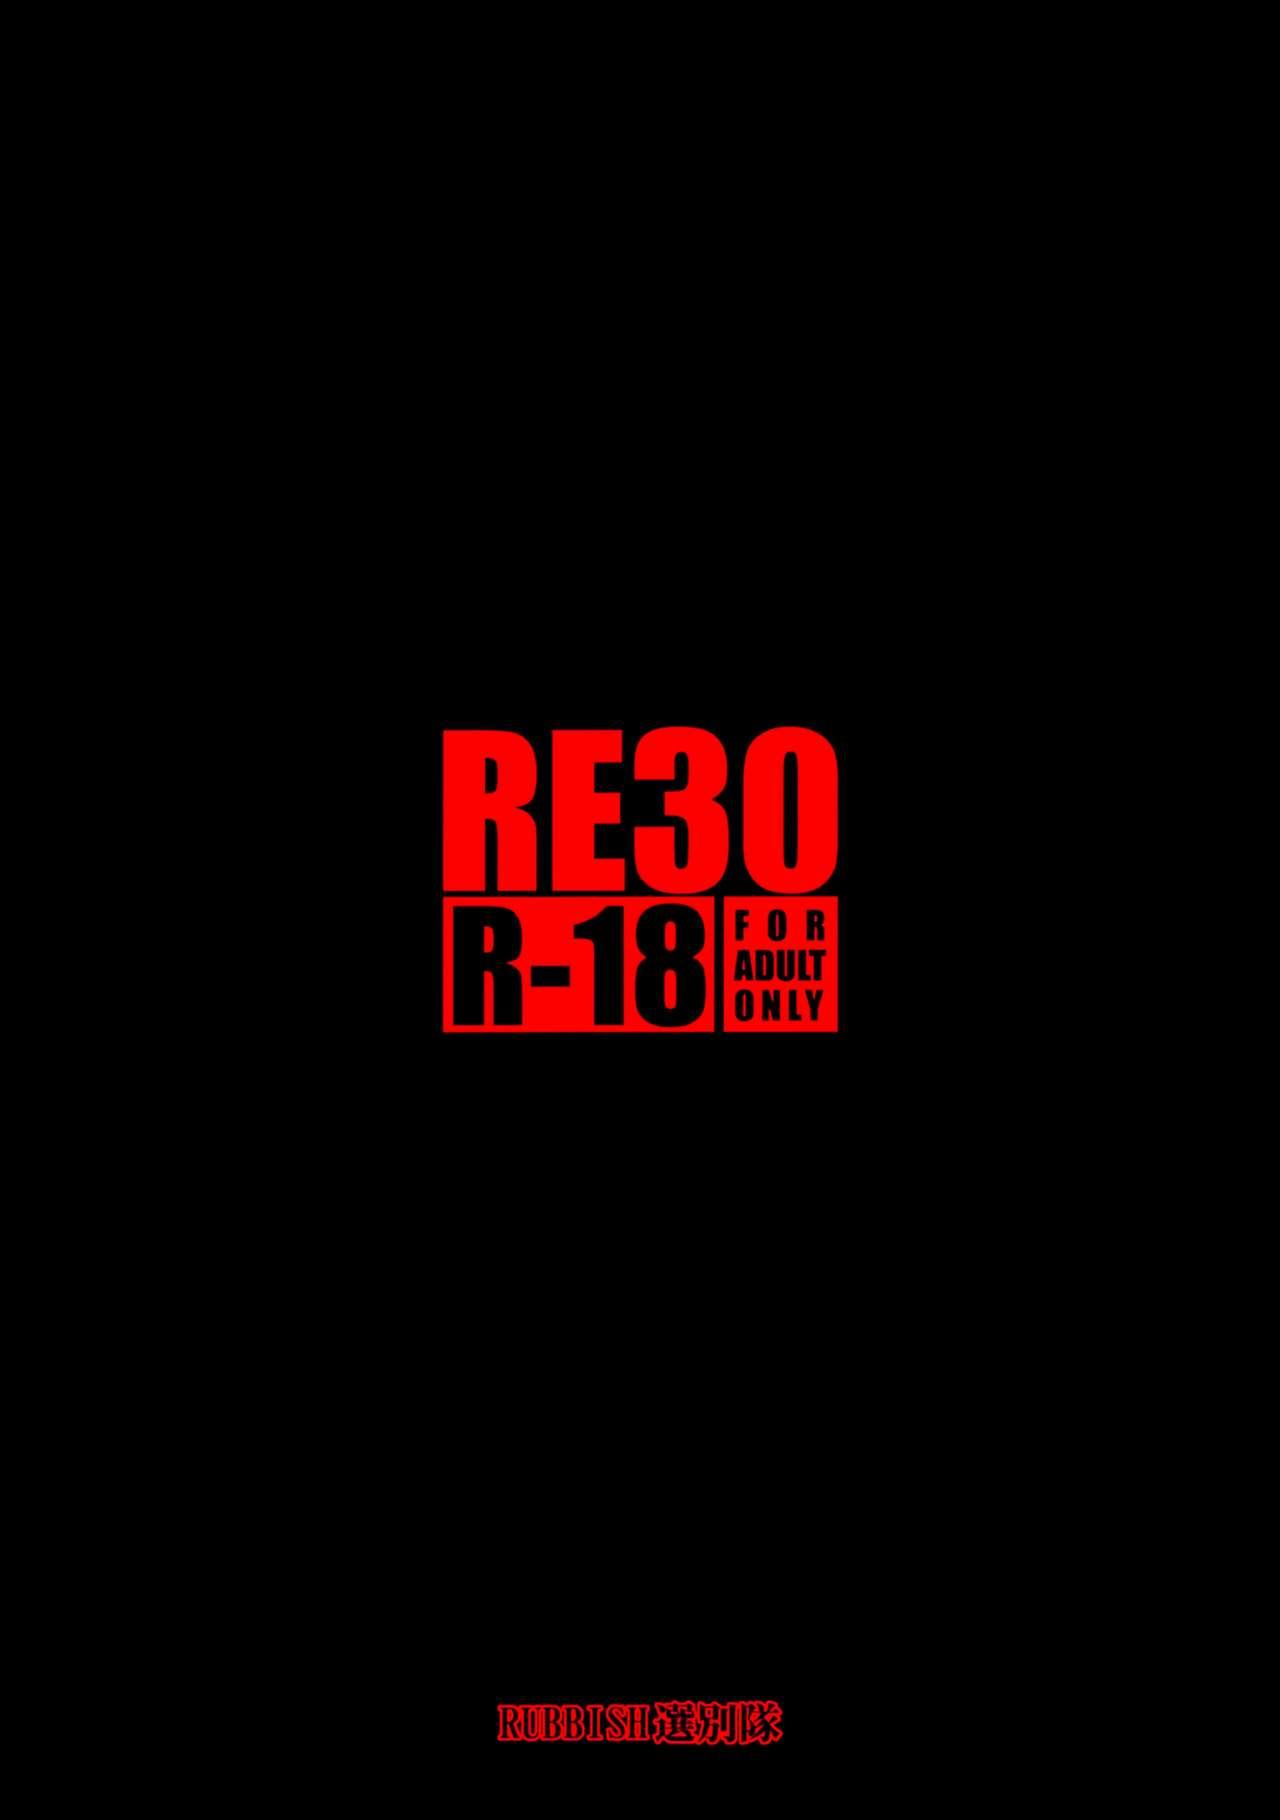 RE30 34